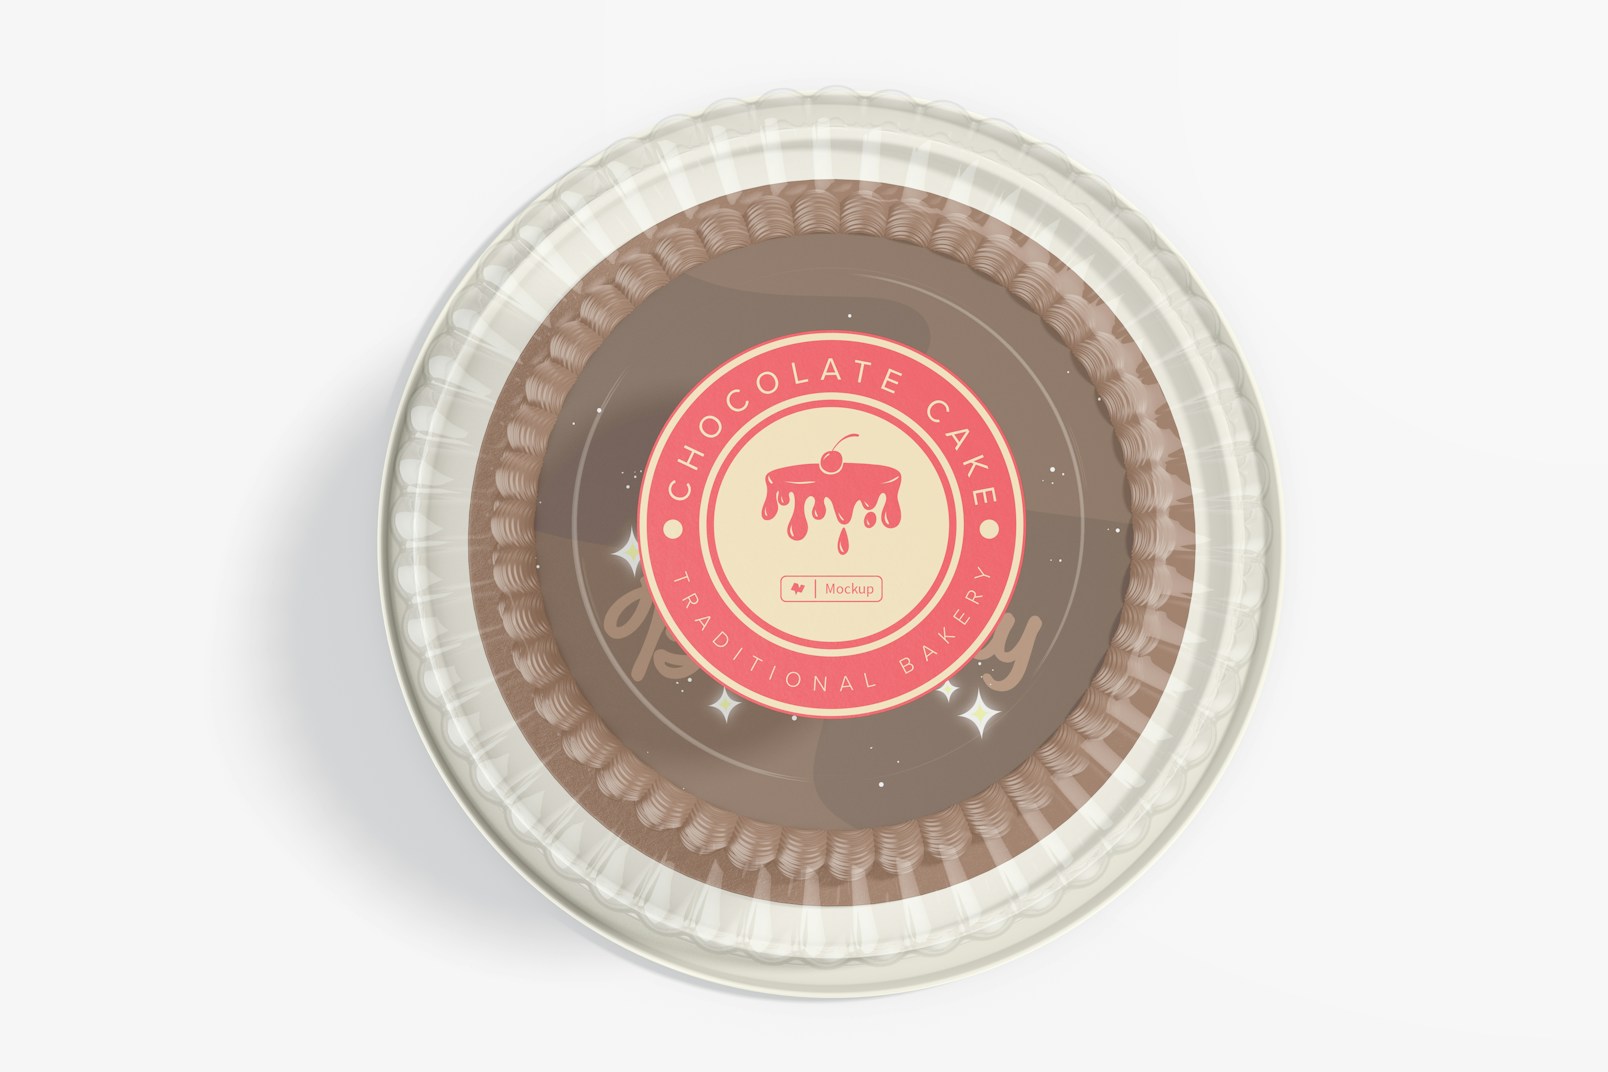 Plastic Round Cake Container Mockup, Top View